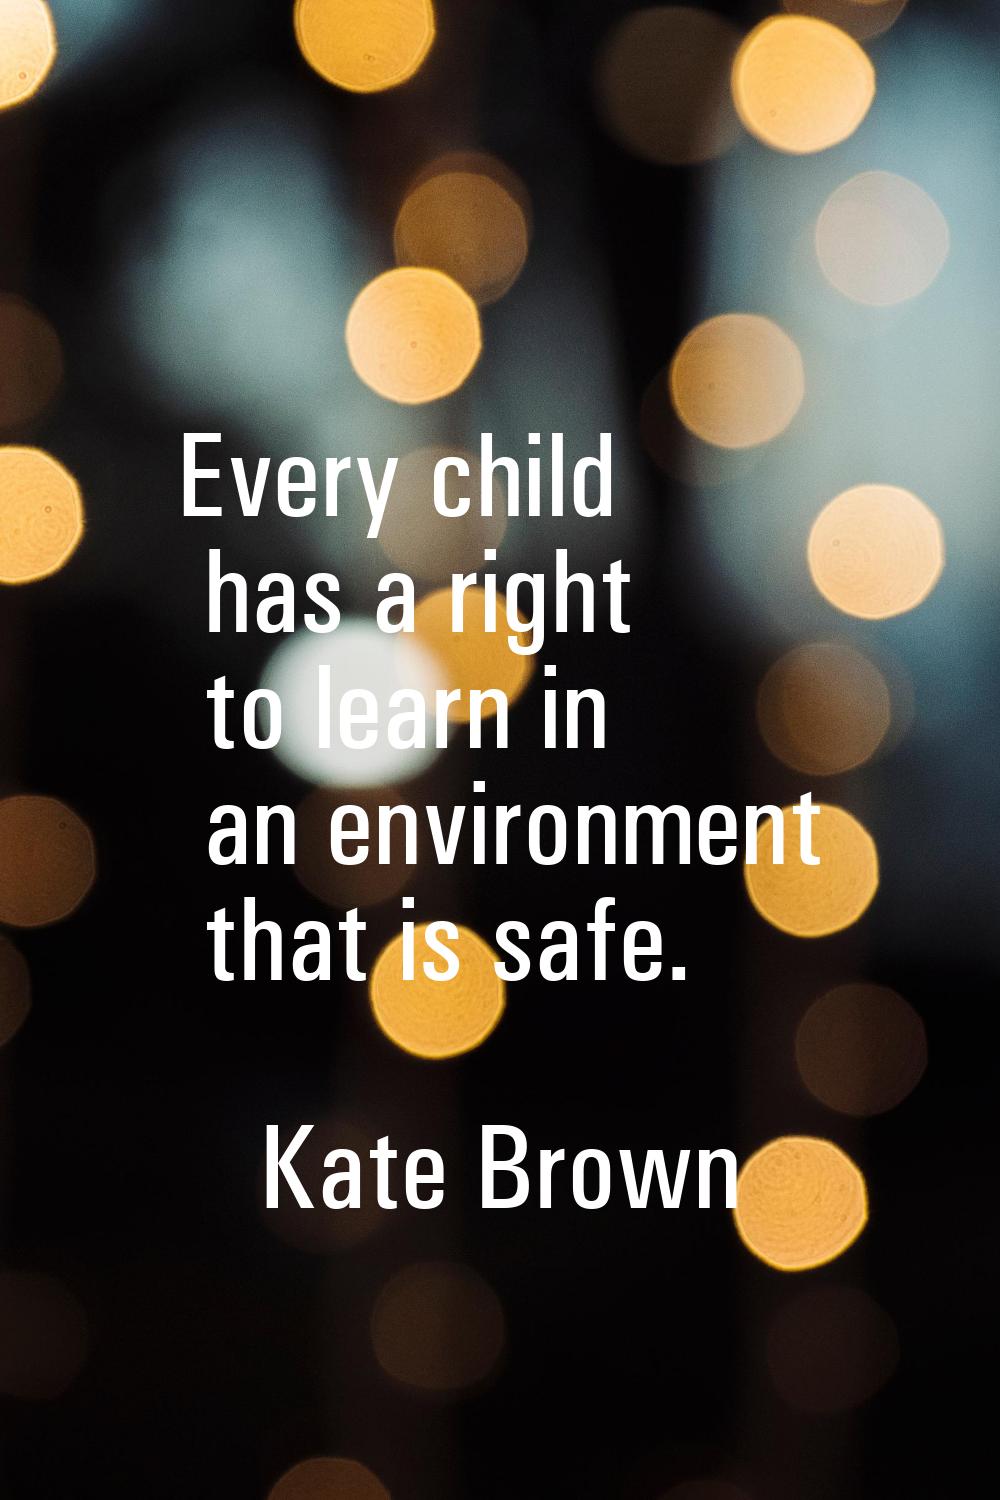 Every child has a right to learn in an environment that is safe.